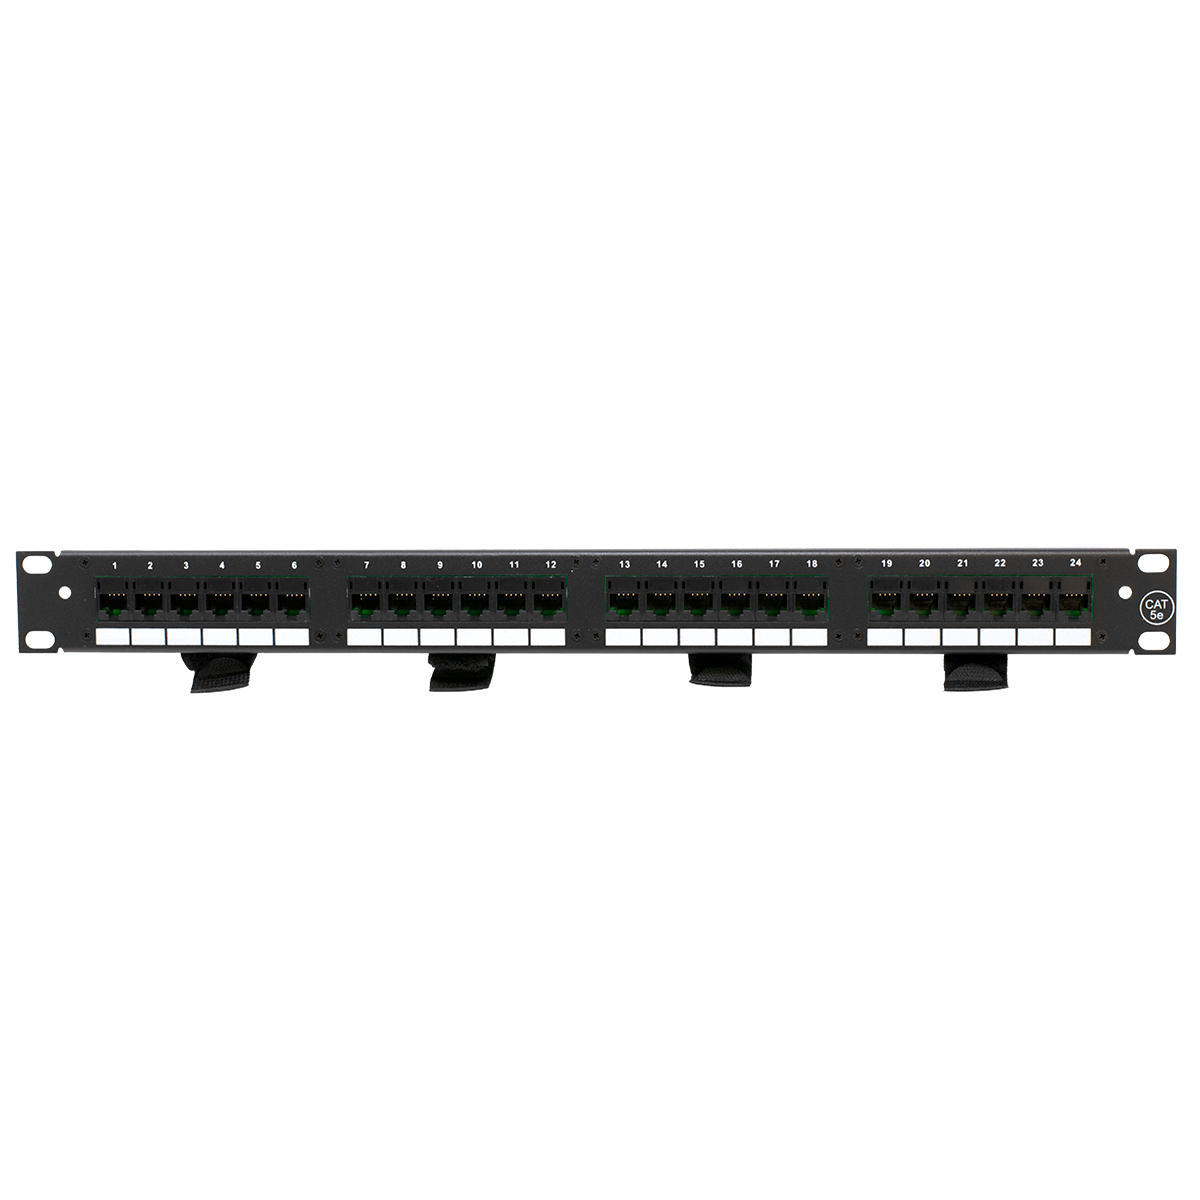 24 Port CAT5E Patch Panel with 4 Female Amp Connectors (Front View)